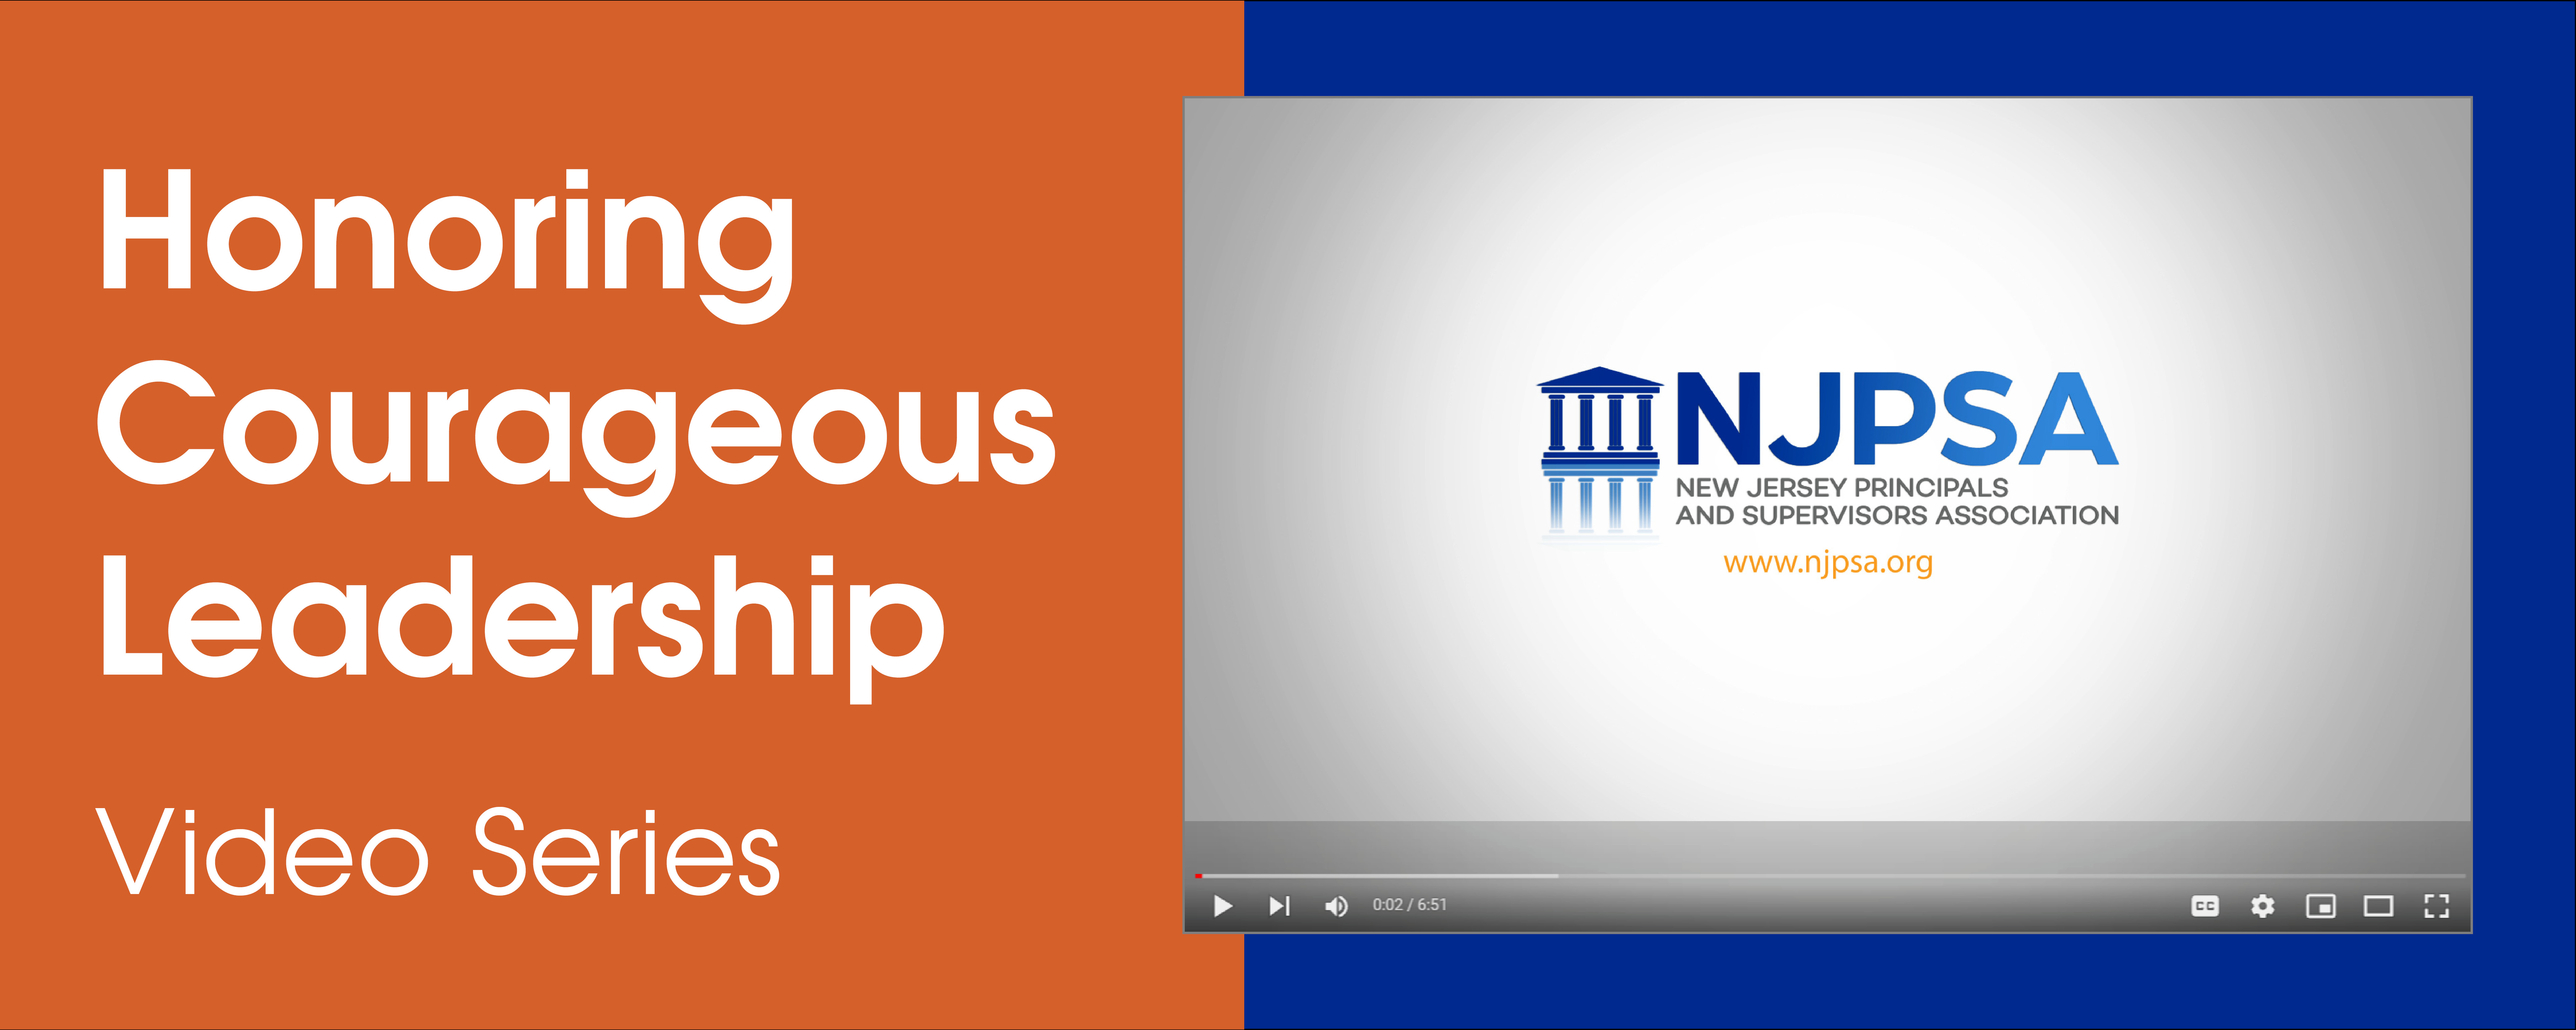 NJPSA Launches New Video Series on YouTube